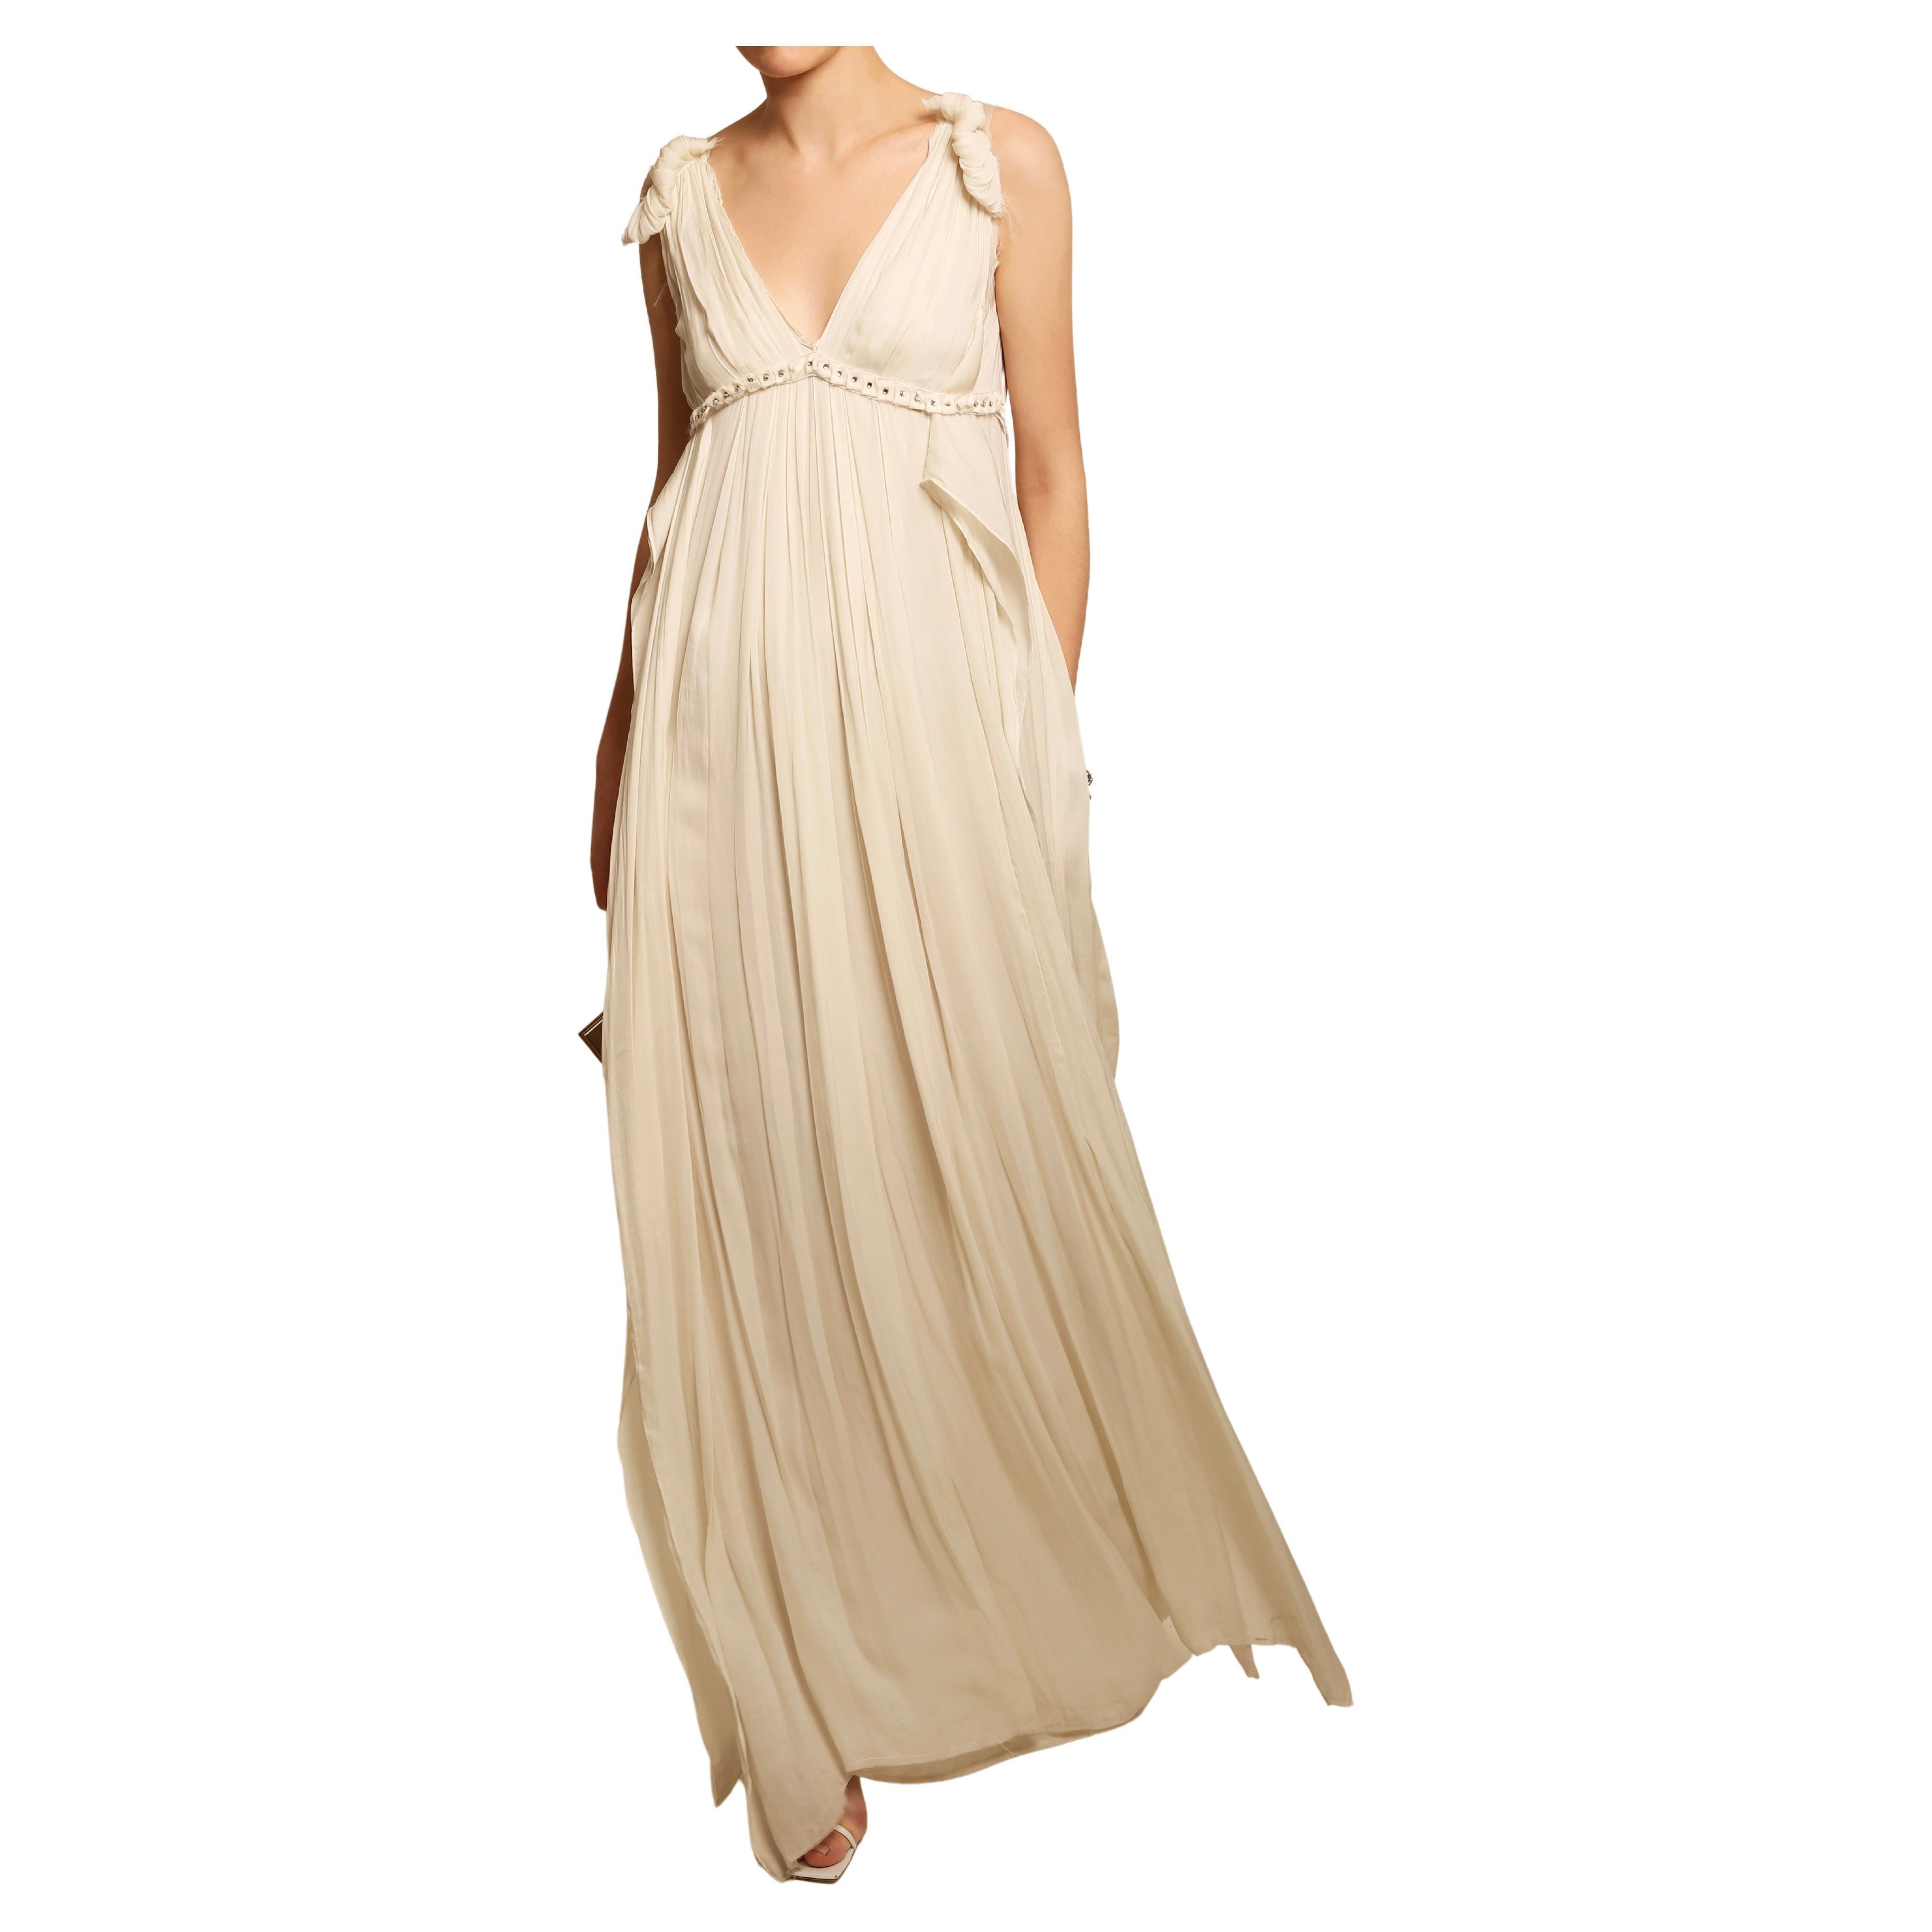 white grecian gown